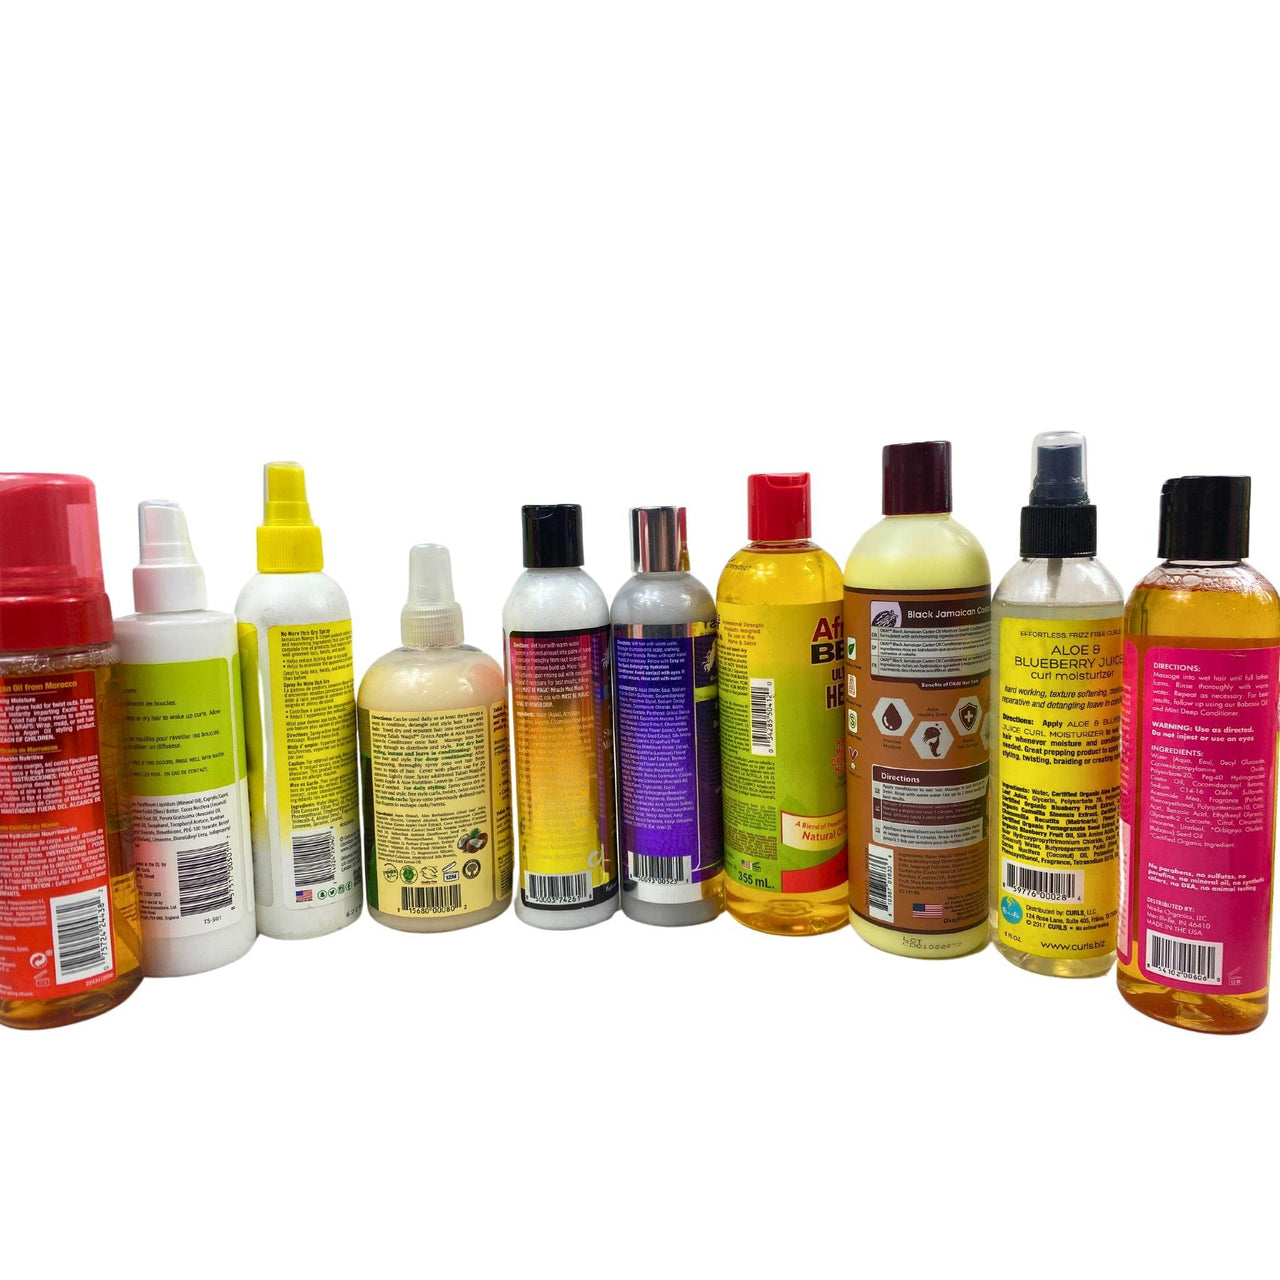 Hair Care Assorted Mix Includes Brands like Mielle,The Mane,Africa's Best,Curls - shampoo,spray,conditioner,oil (60 Pcs lot) - Discount Wholesalers Inc